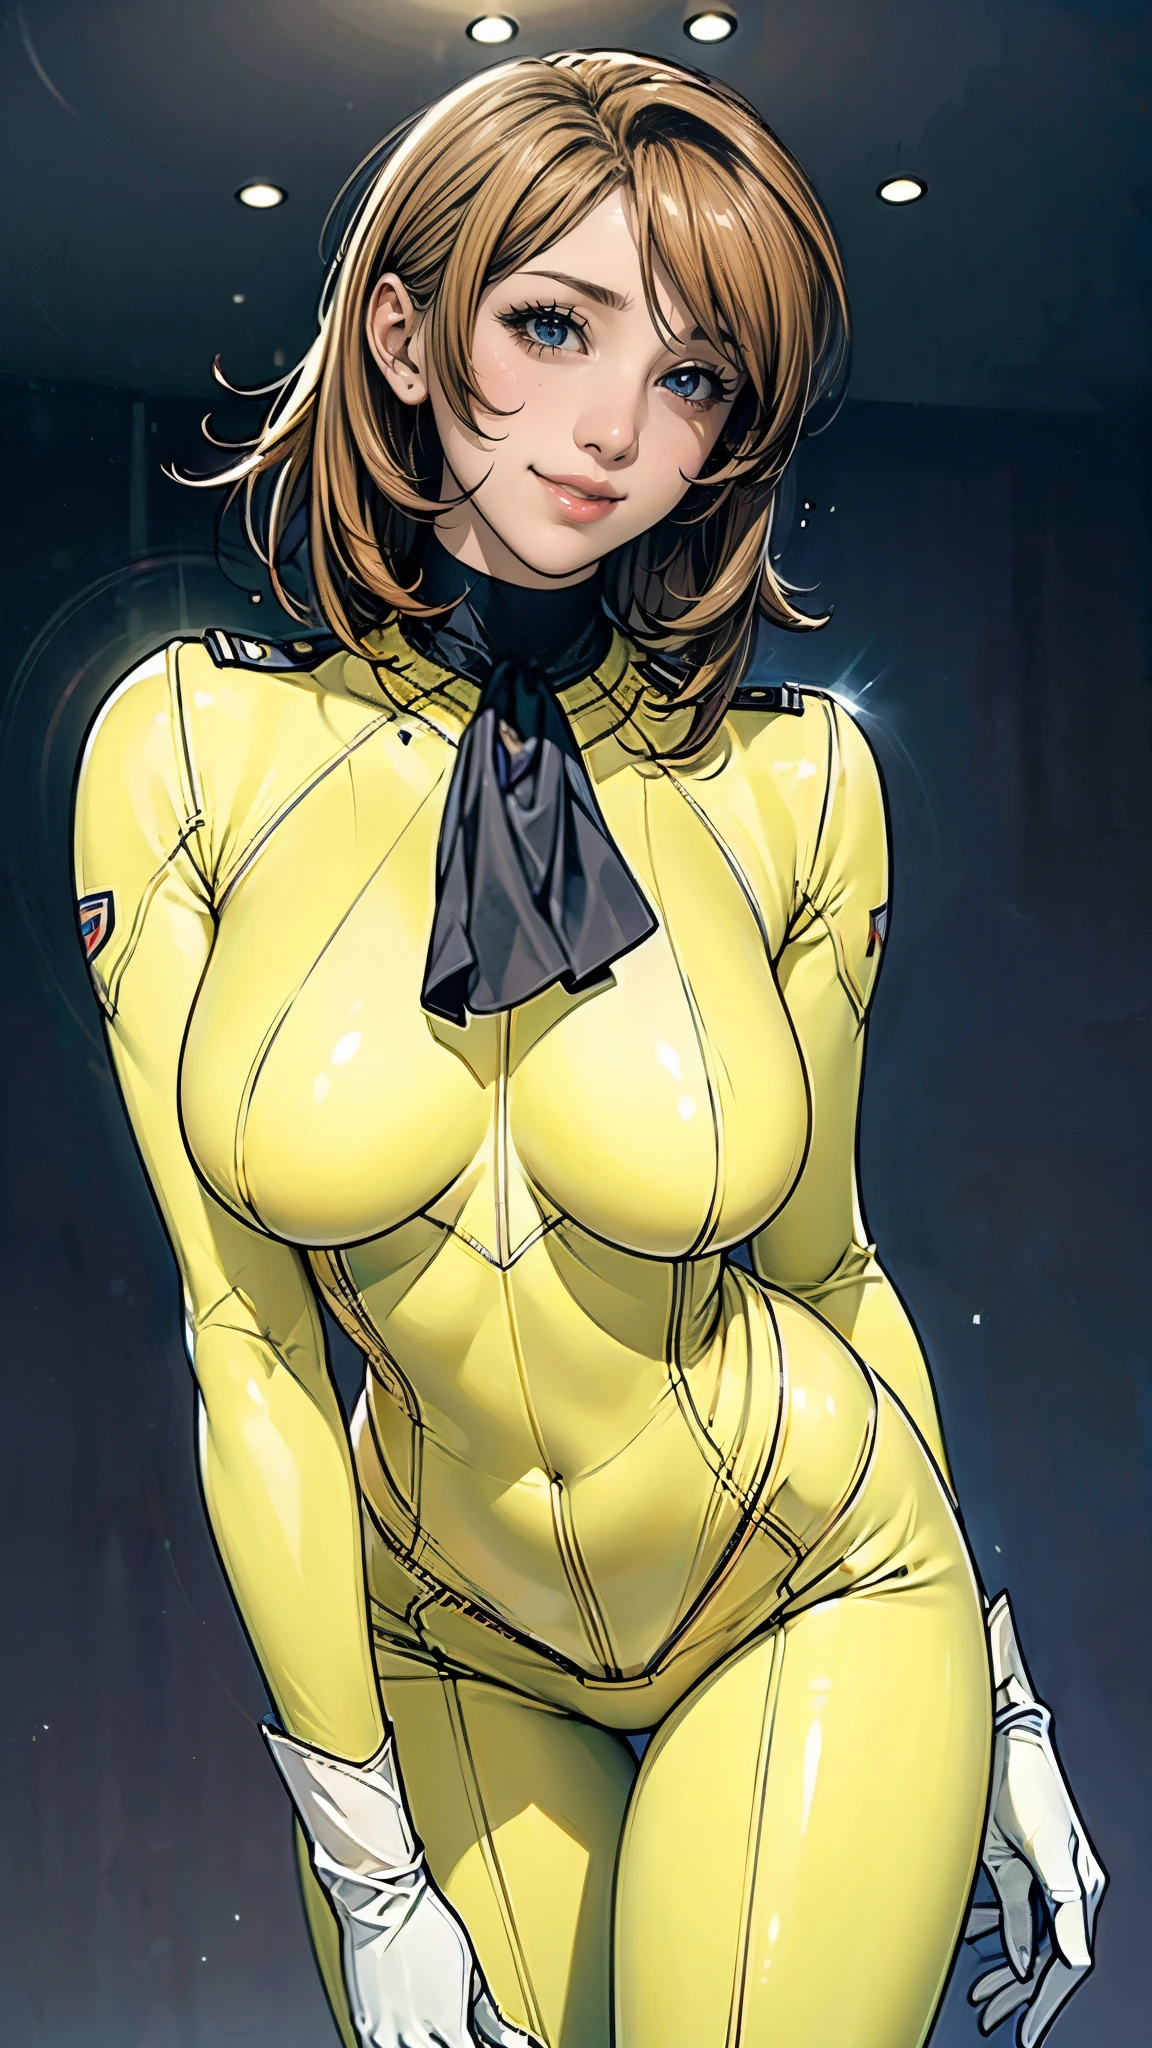 (masterpiece),(highest quality),(Very detailed),(High resolution),(Photorealistic Stick),(Realistic),(8K),wallpaper,Perfect lighting,BREAK(One Woman),((Moriyuki:1.5)),(Mori Bodysuit, Yellow bodysuit, belt:1.5),(Mori Uniform, White gloves, uniform, Brown jacket, Ascot, belt:1.5),(22 years old),(((Extremely form fitting bodysuit:1.5))),(((Very detailed bodysuit drawing:1.5))),(Beautiful Eyes:1.5),(Detailed face drawing:1.5),(Detailed face drawing:1.5),((Very detailed female hand:1.5)),(Shiny skin:1.0),(((Very muscular:1.5))),((Big Breasts:1.5)),(Wall thickness),(((Thick thighs:1.5))),(Sensual body),(Black background:1.5),(((Blur the background:1.5))),(((Leaning forward:1.5))),(((A gentle smile:1.5))),(From below:1.4)